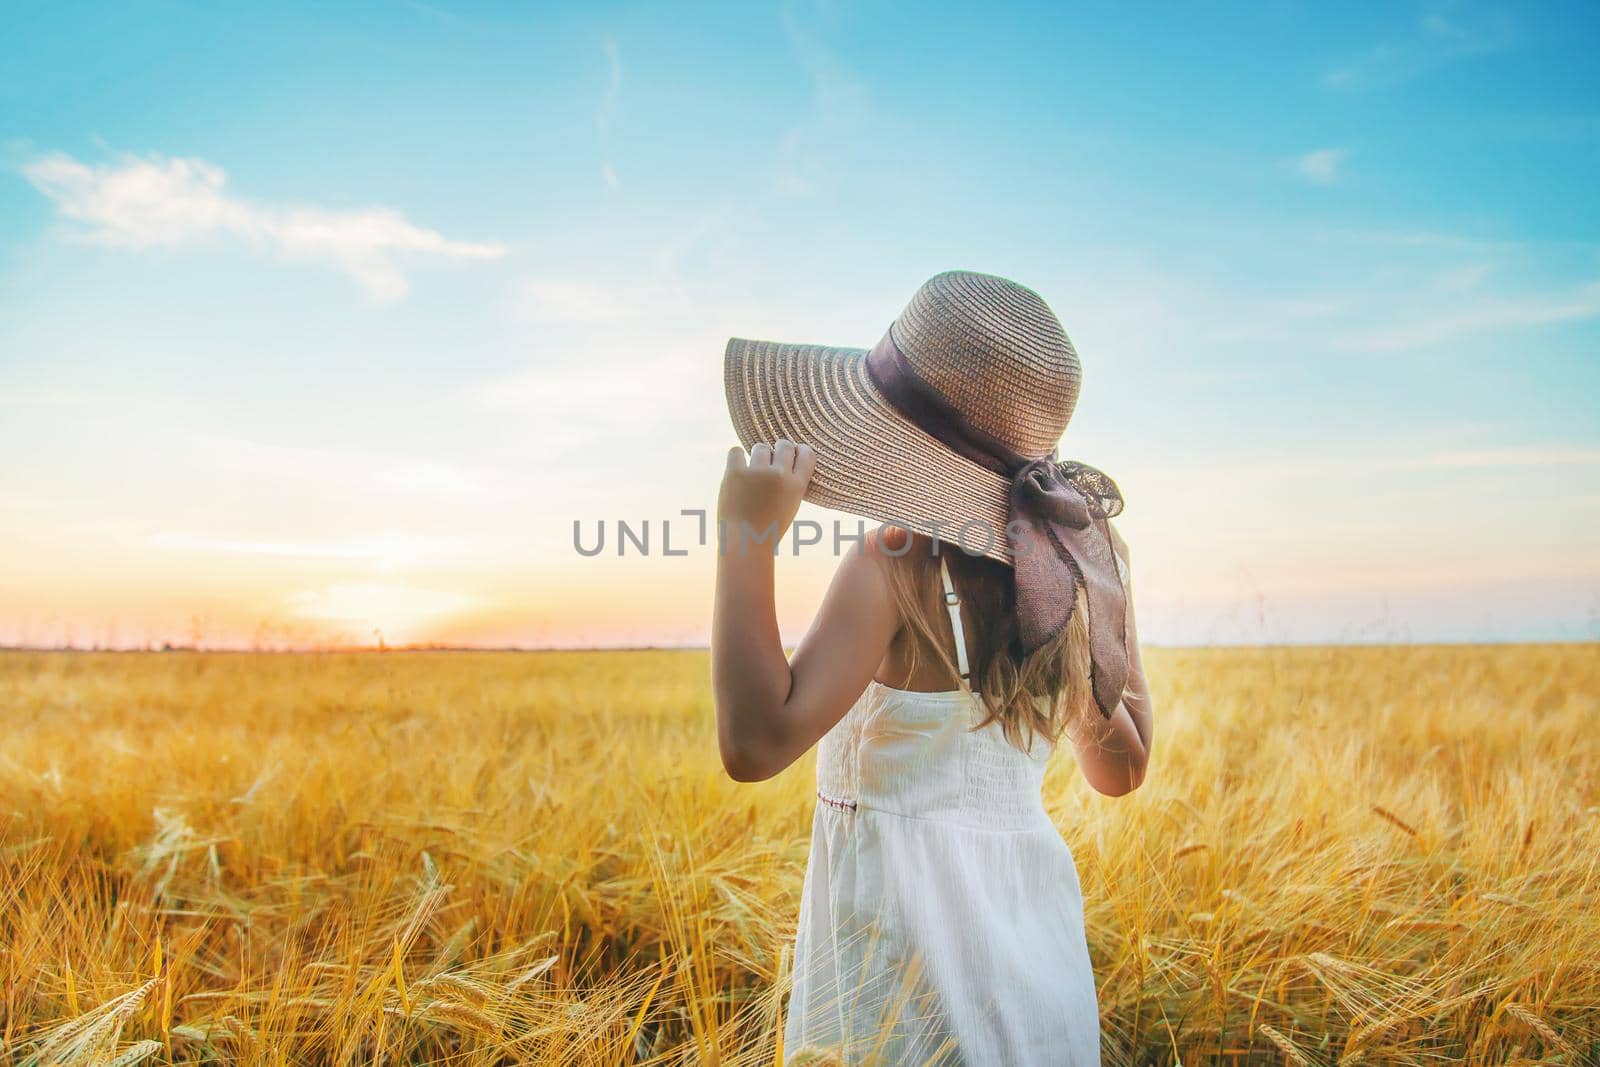 A child in a wheat field. Sunset. Selective focus. by yanadjana